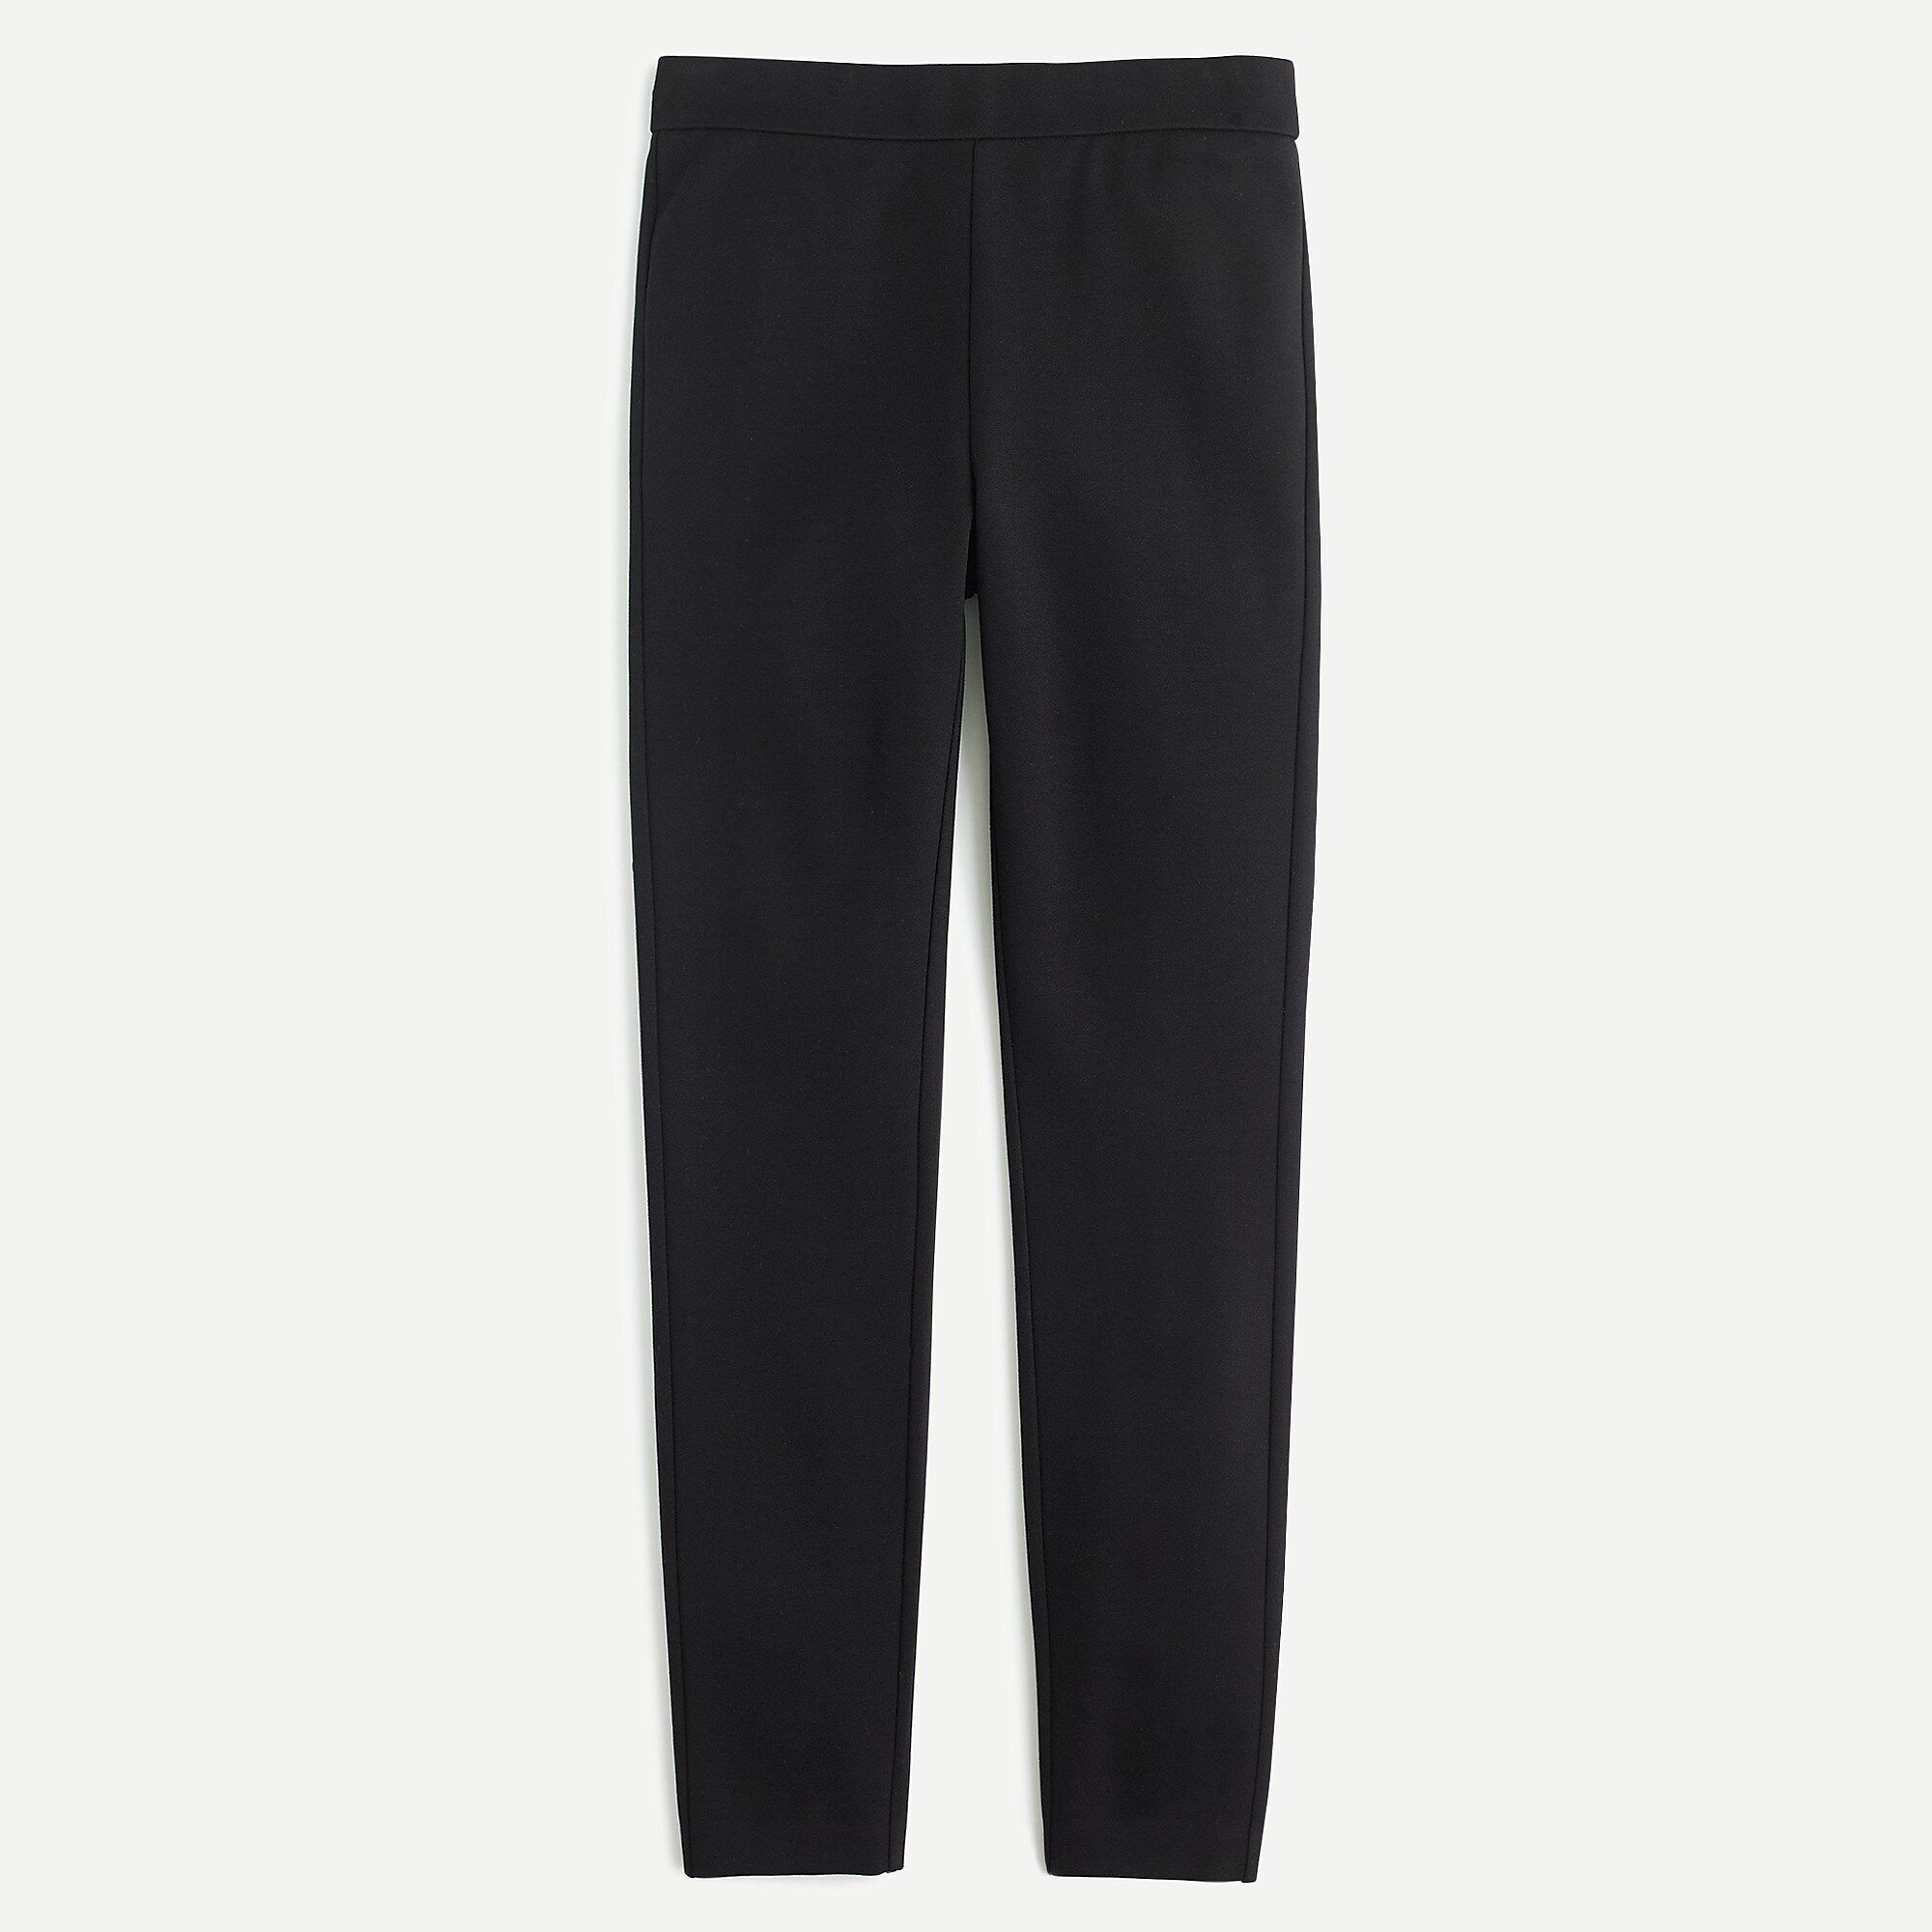 Any day pant in stretch ponte | J.Crew US